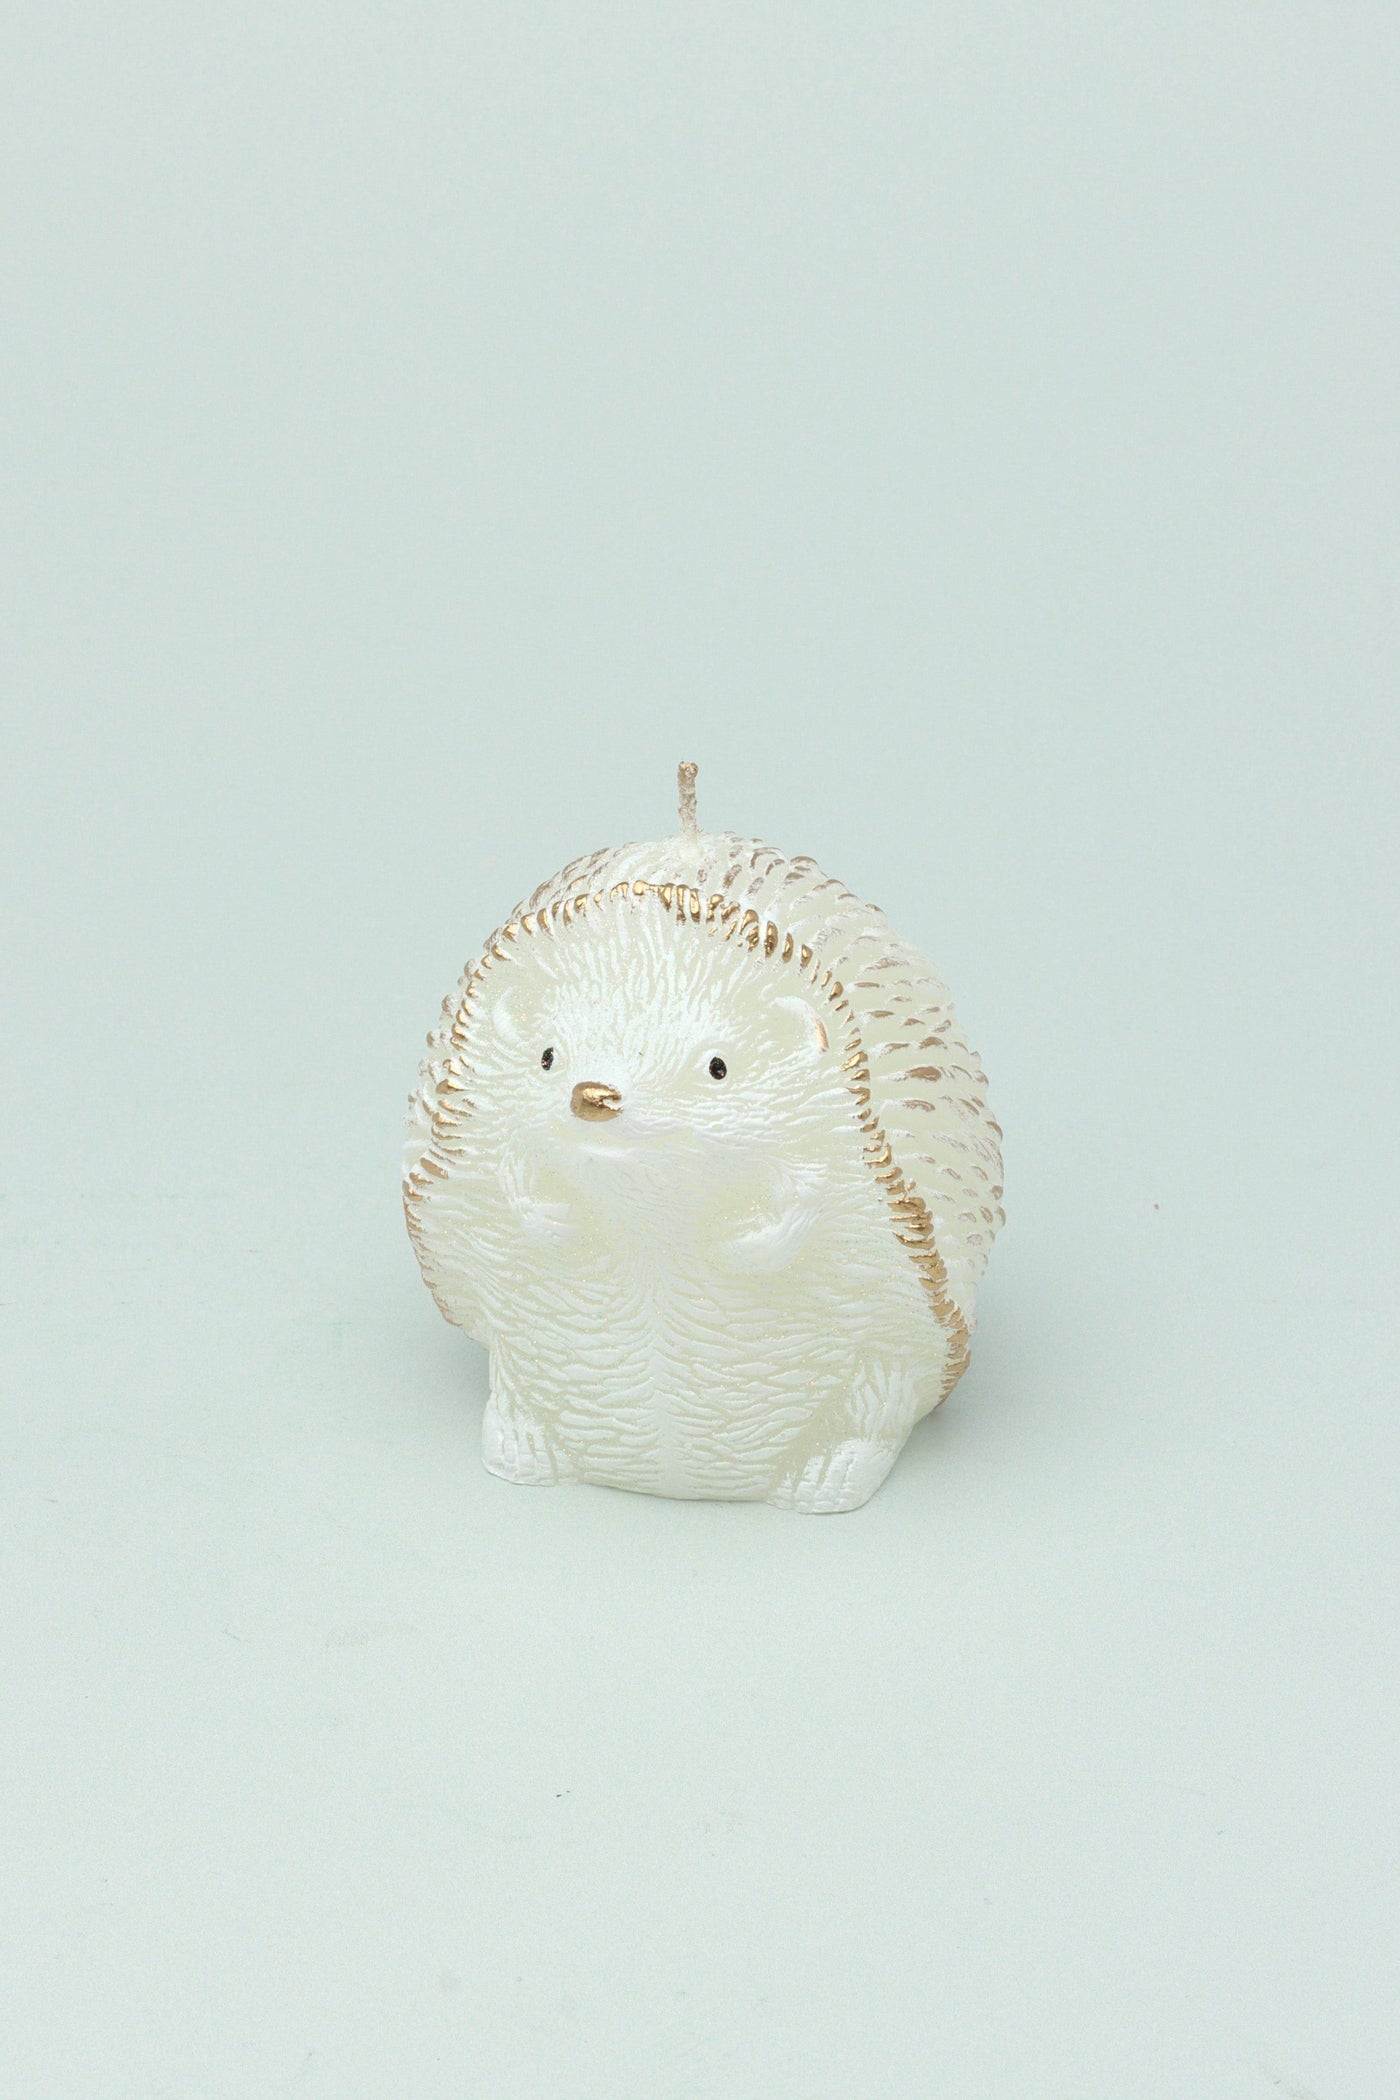 G Decor Candles White / Hedgehog Forest Creatures White Glitter Realistic Animals Birds Cute Festive 3D Candle